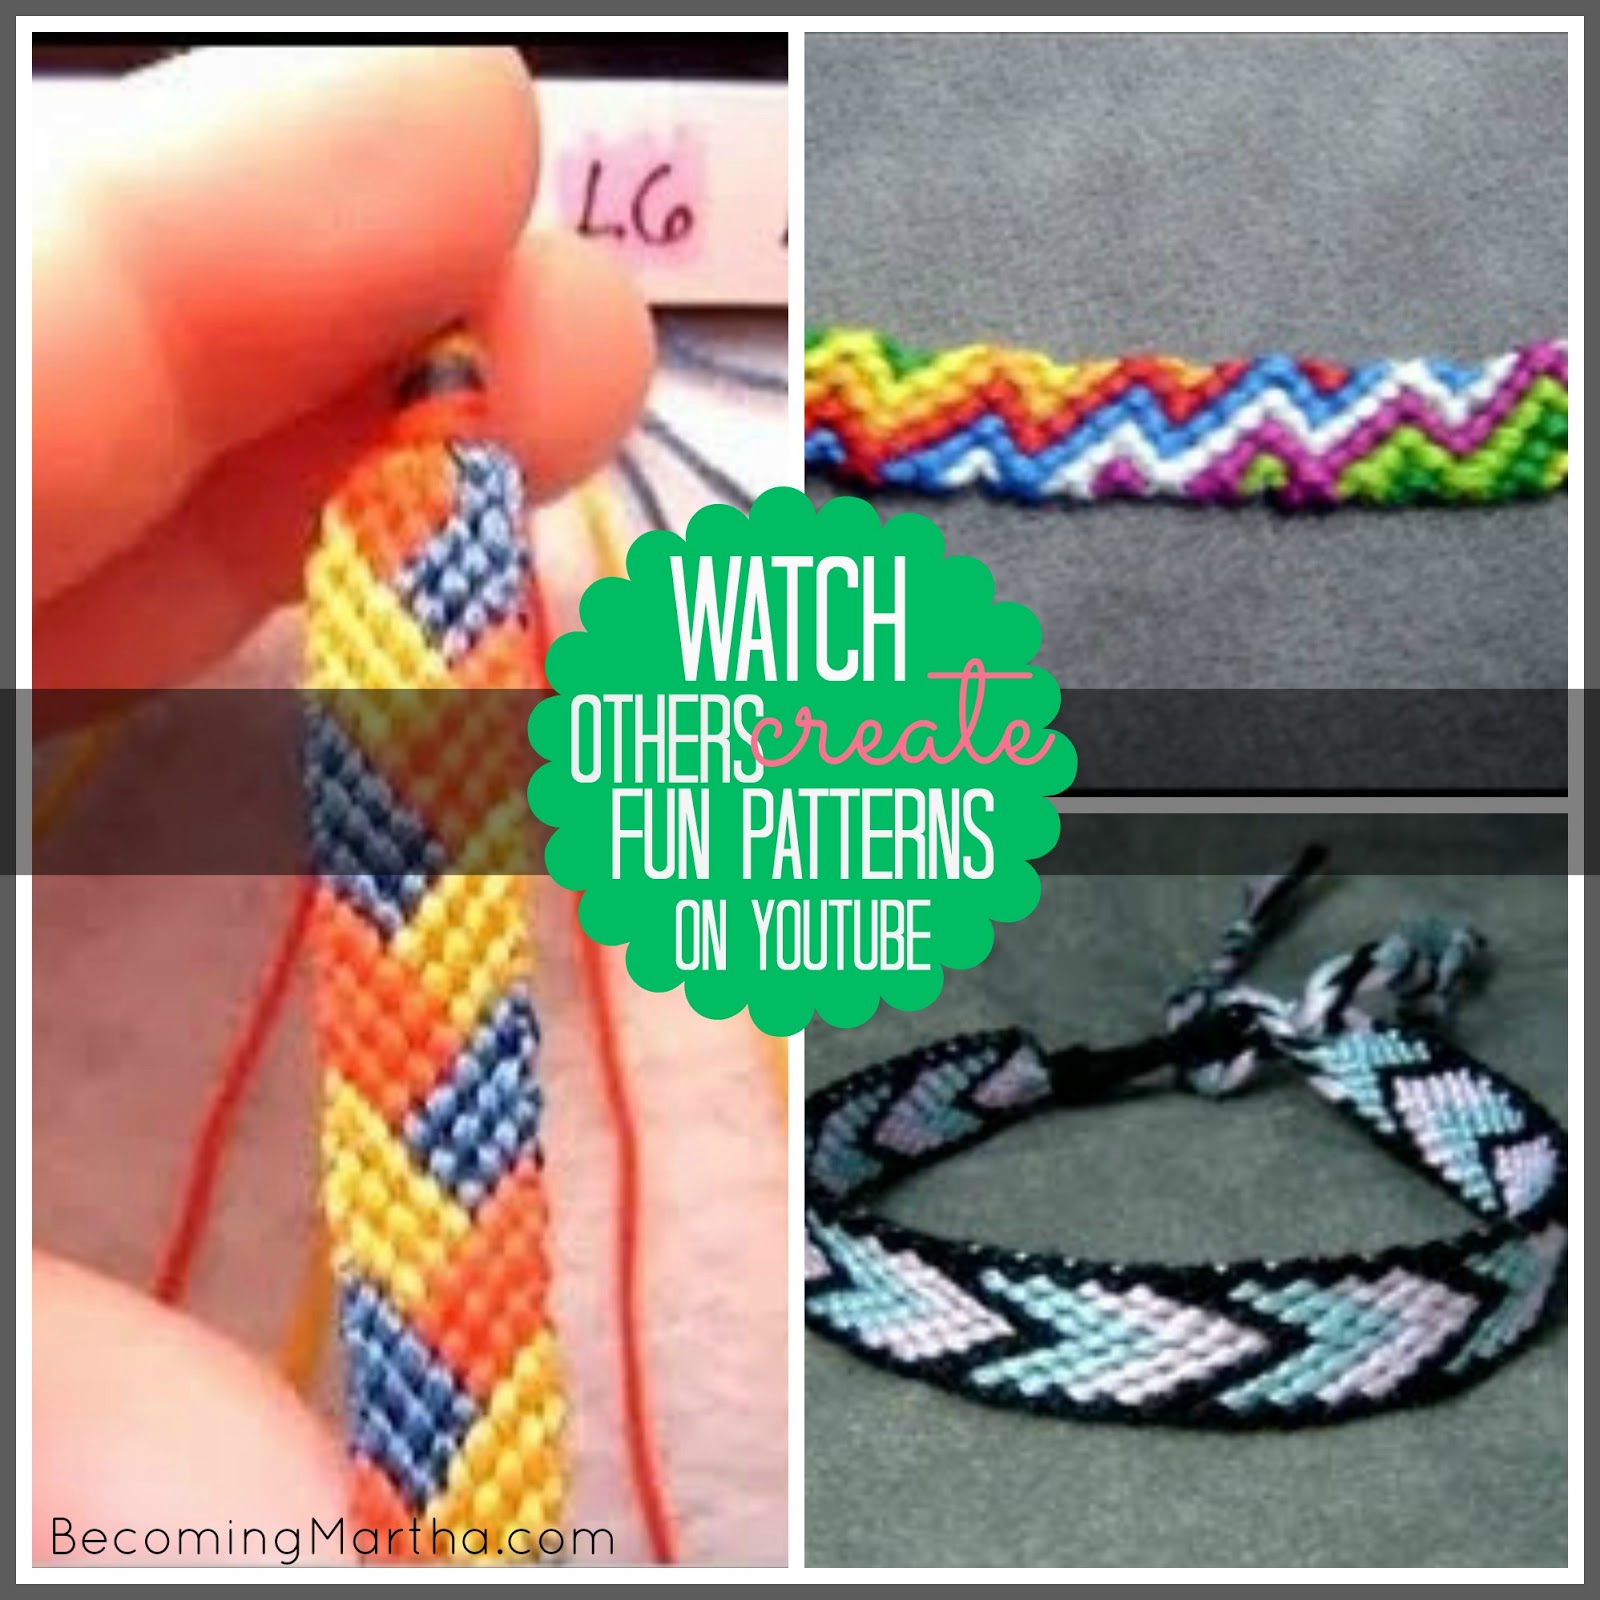 20 Friendship Bracelet Tutorials from 1 Supply - The Simply Crafted Life